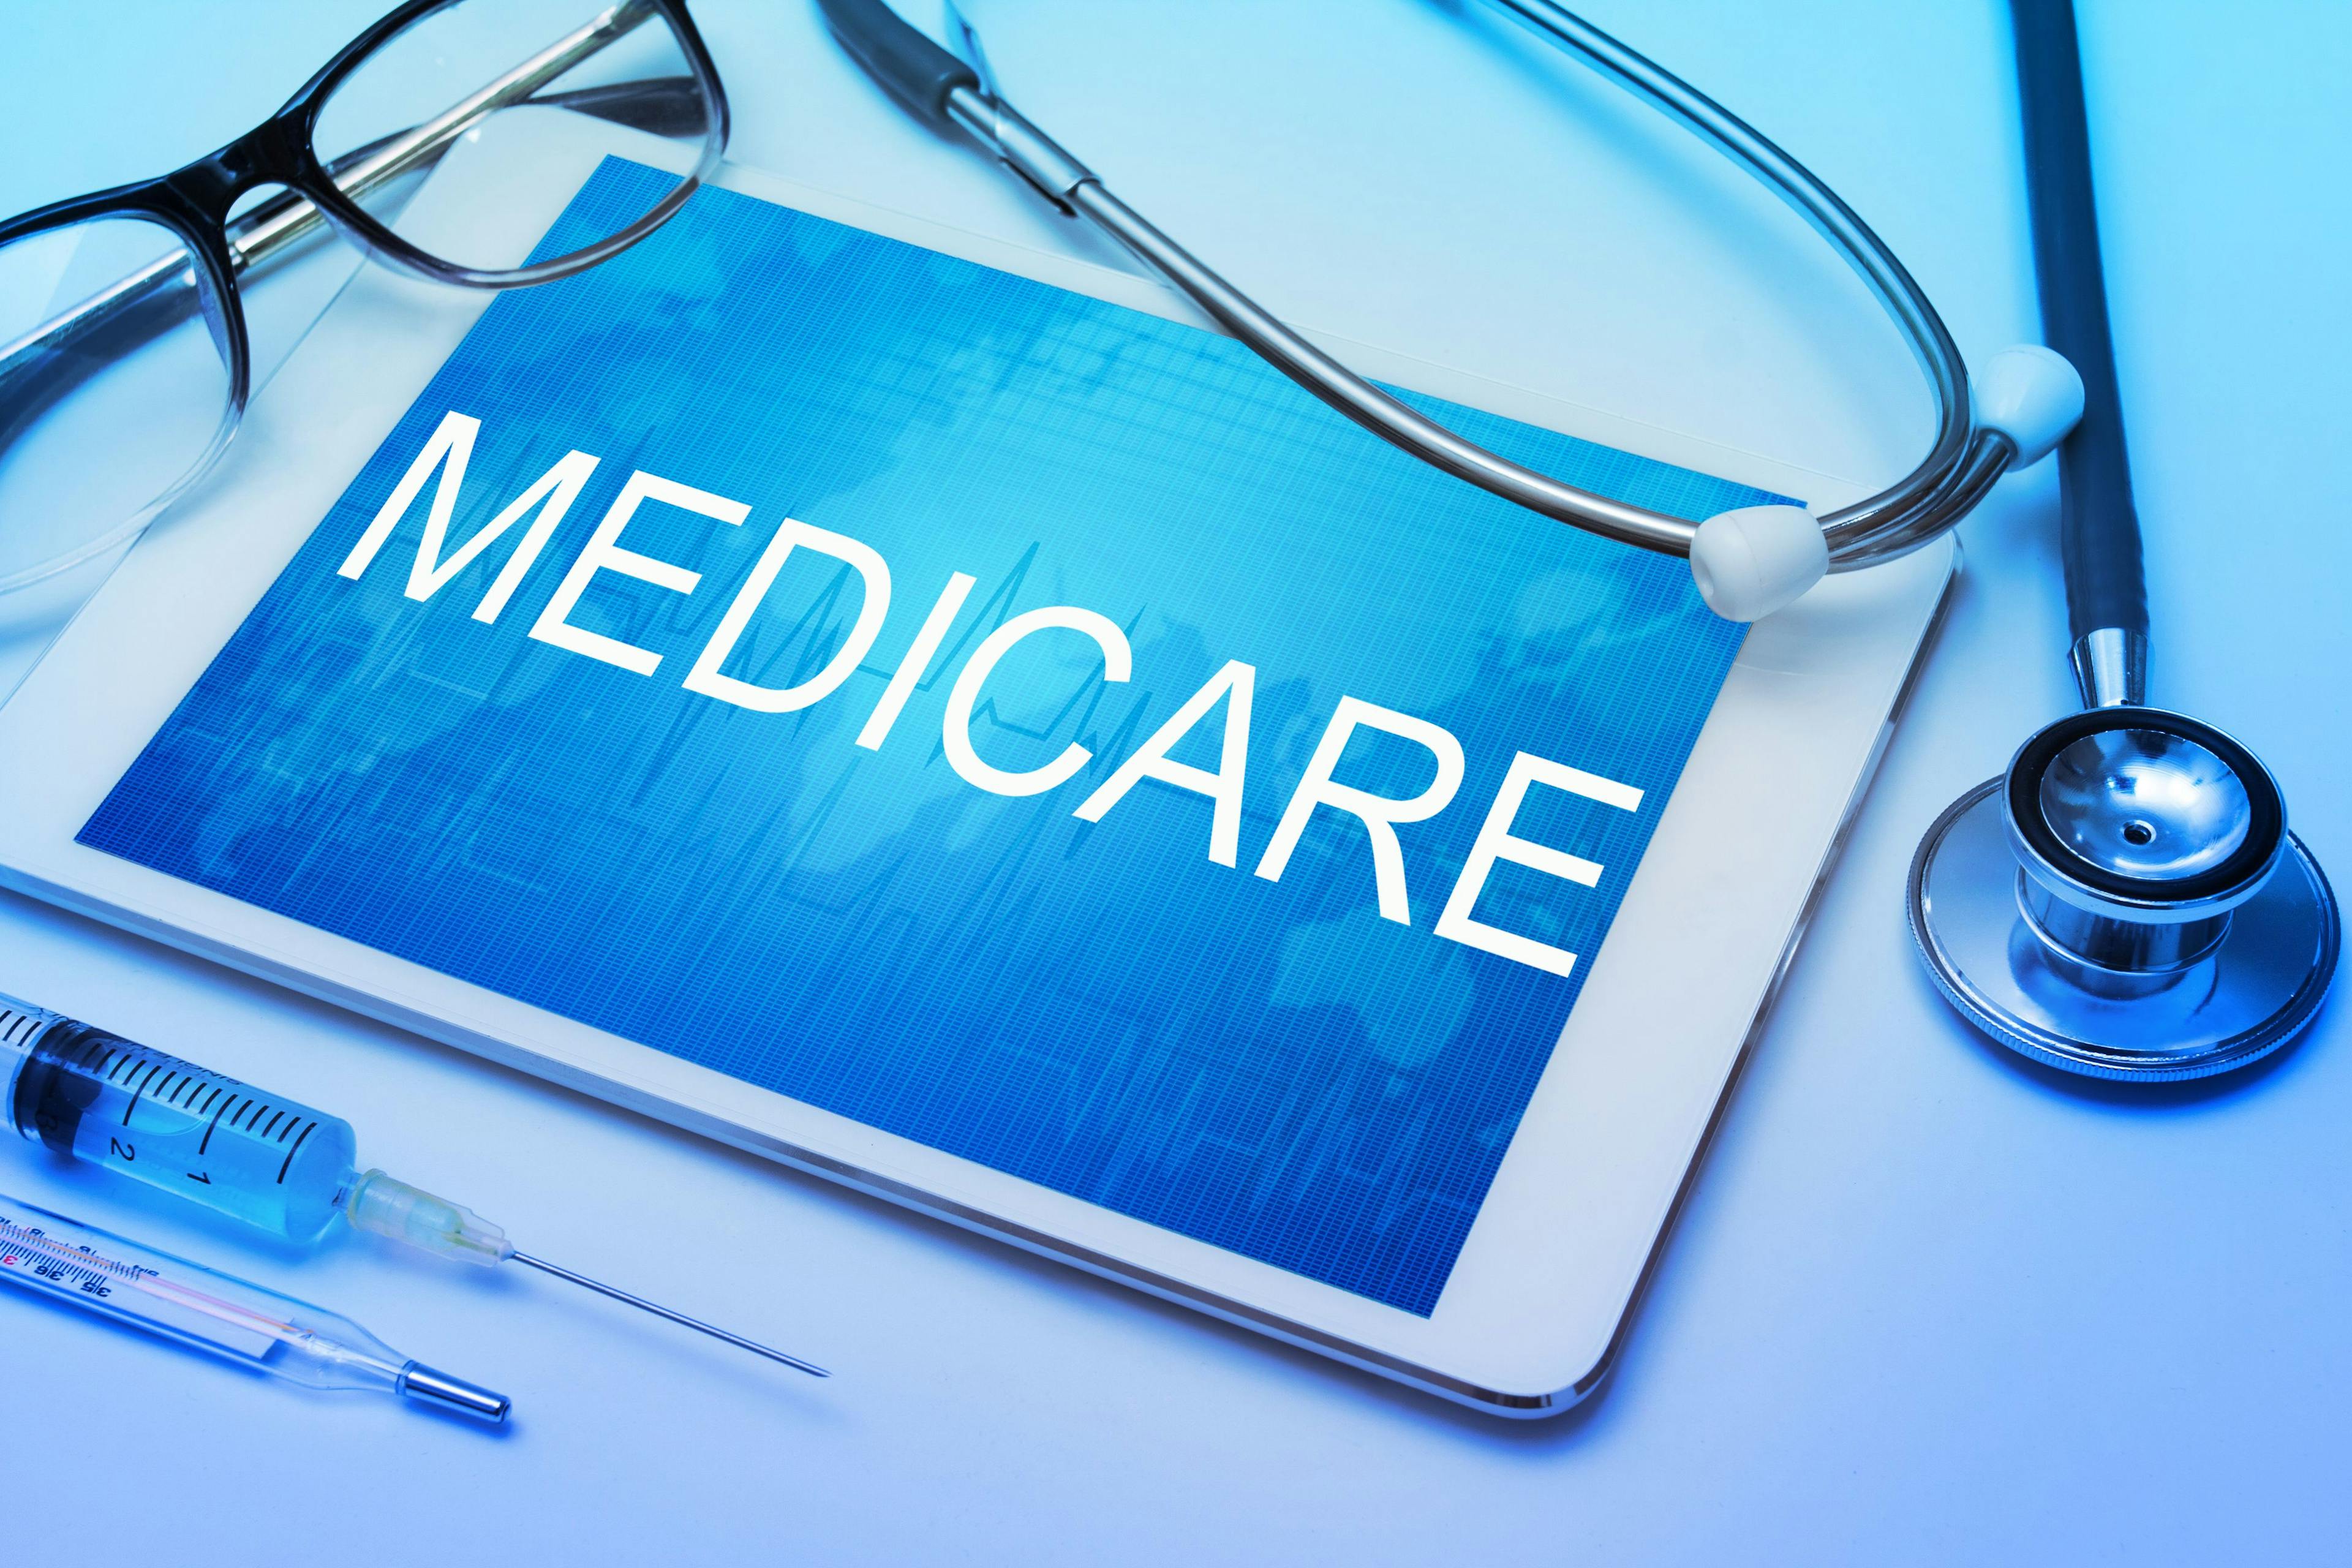 Freezing Medicare physician fee payments may force physicians out of the program